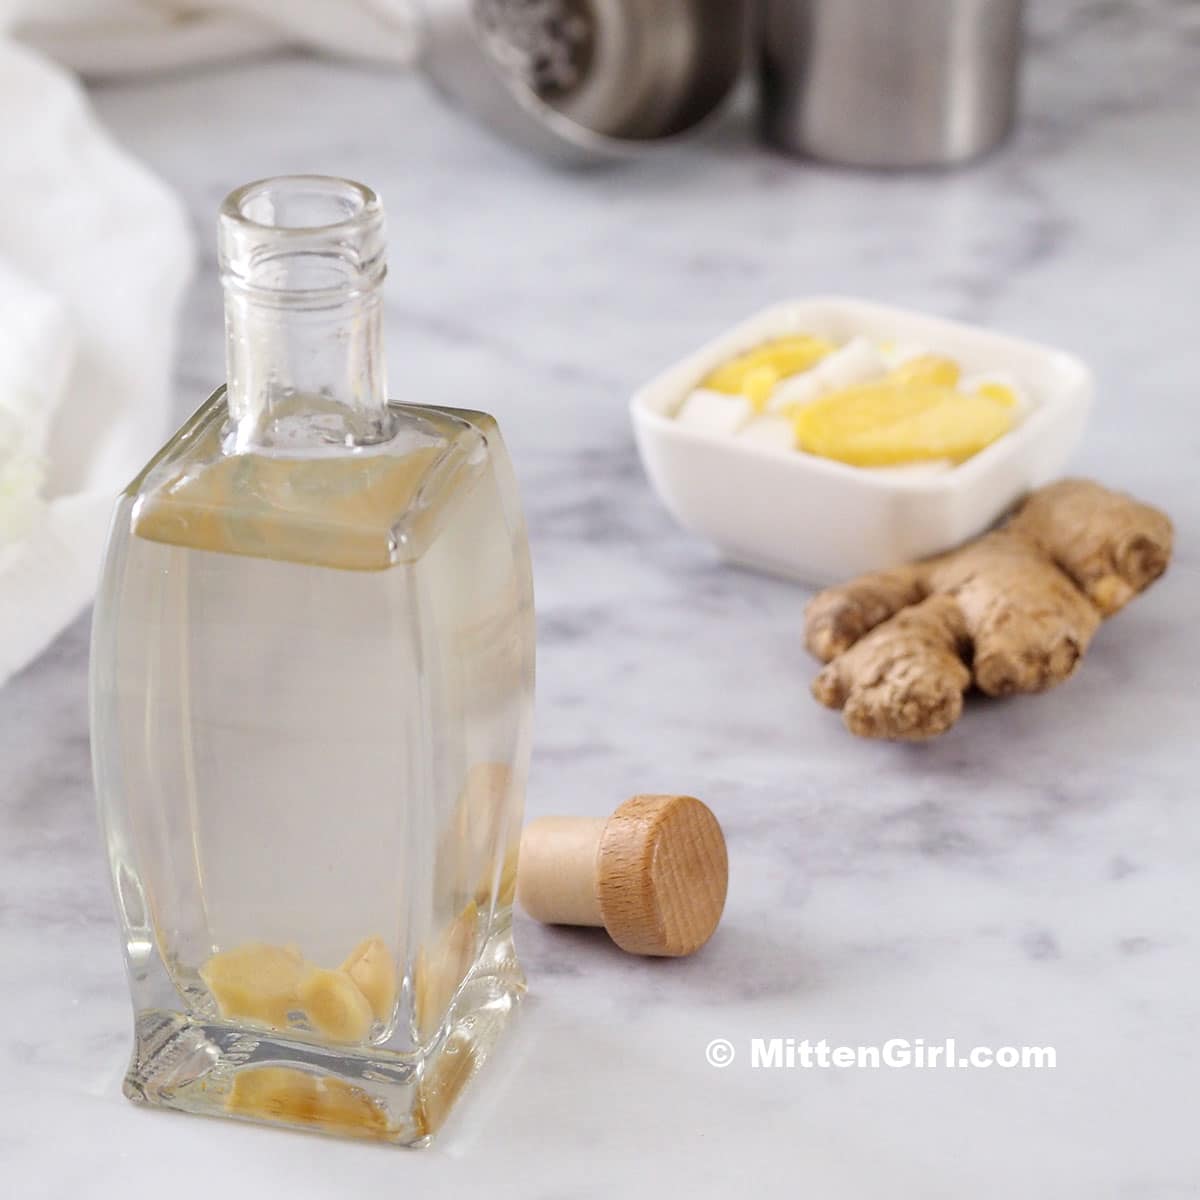 Ginger Simple Syrup